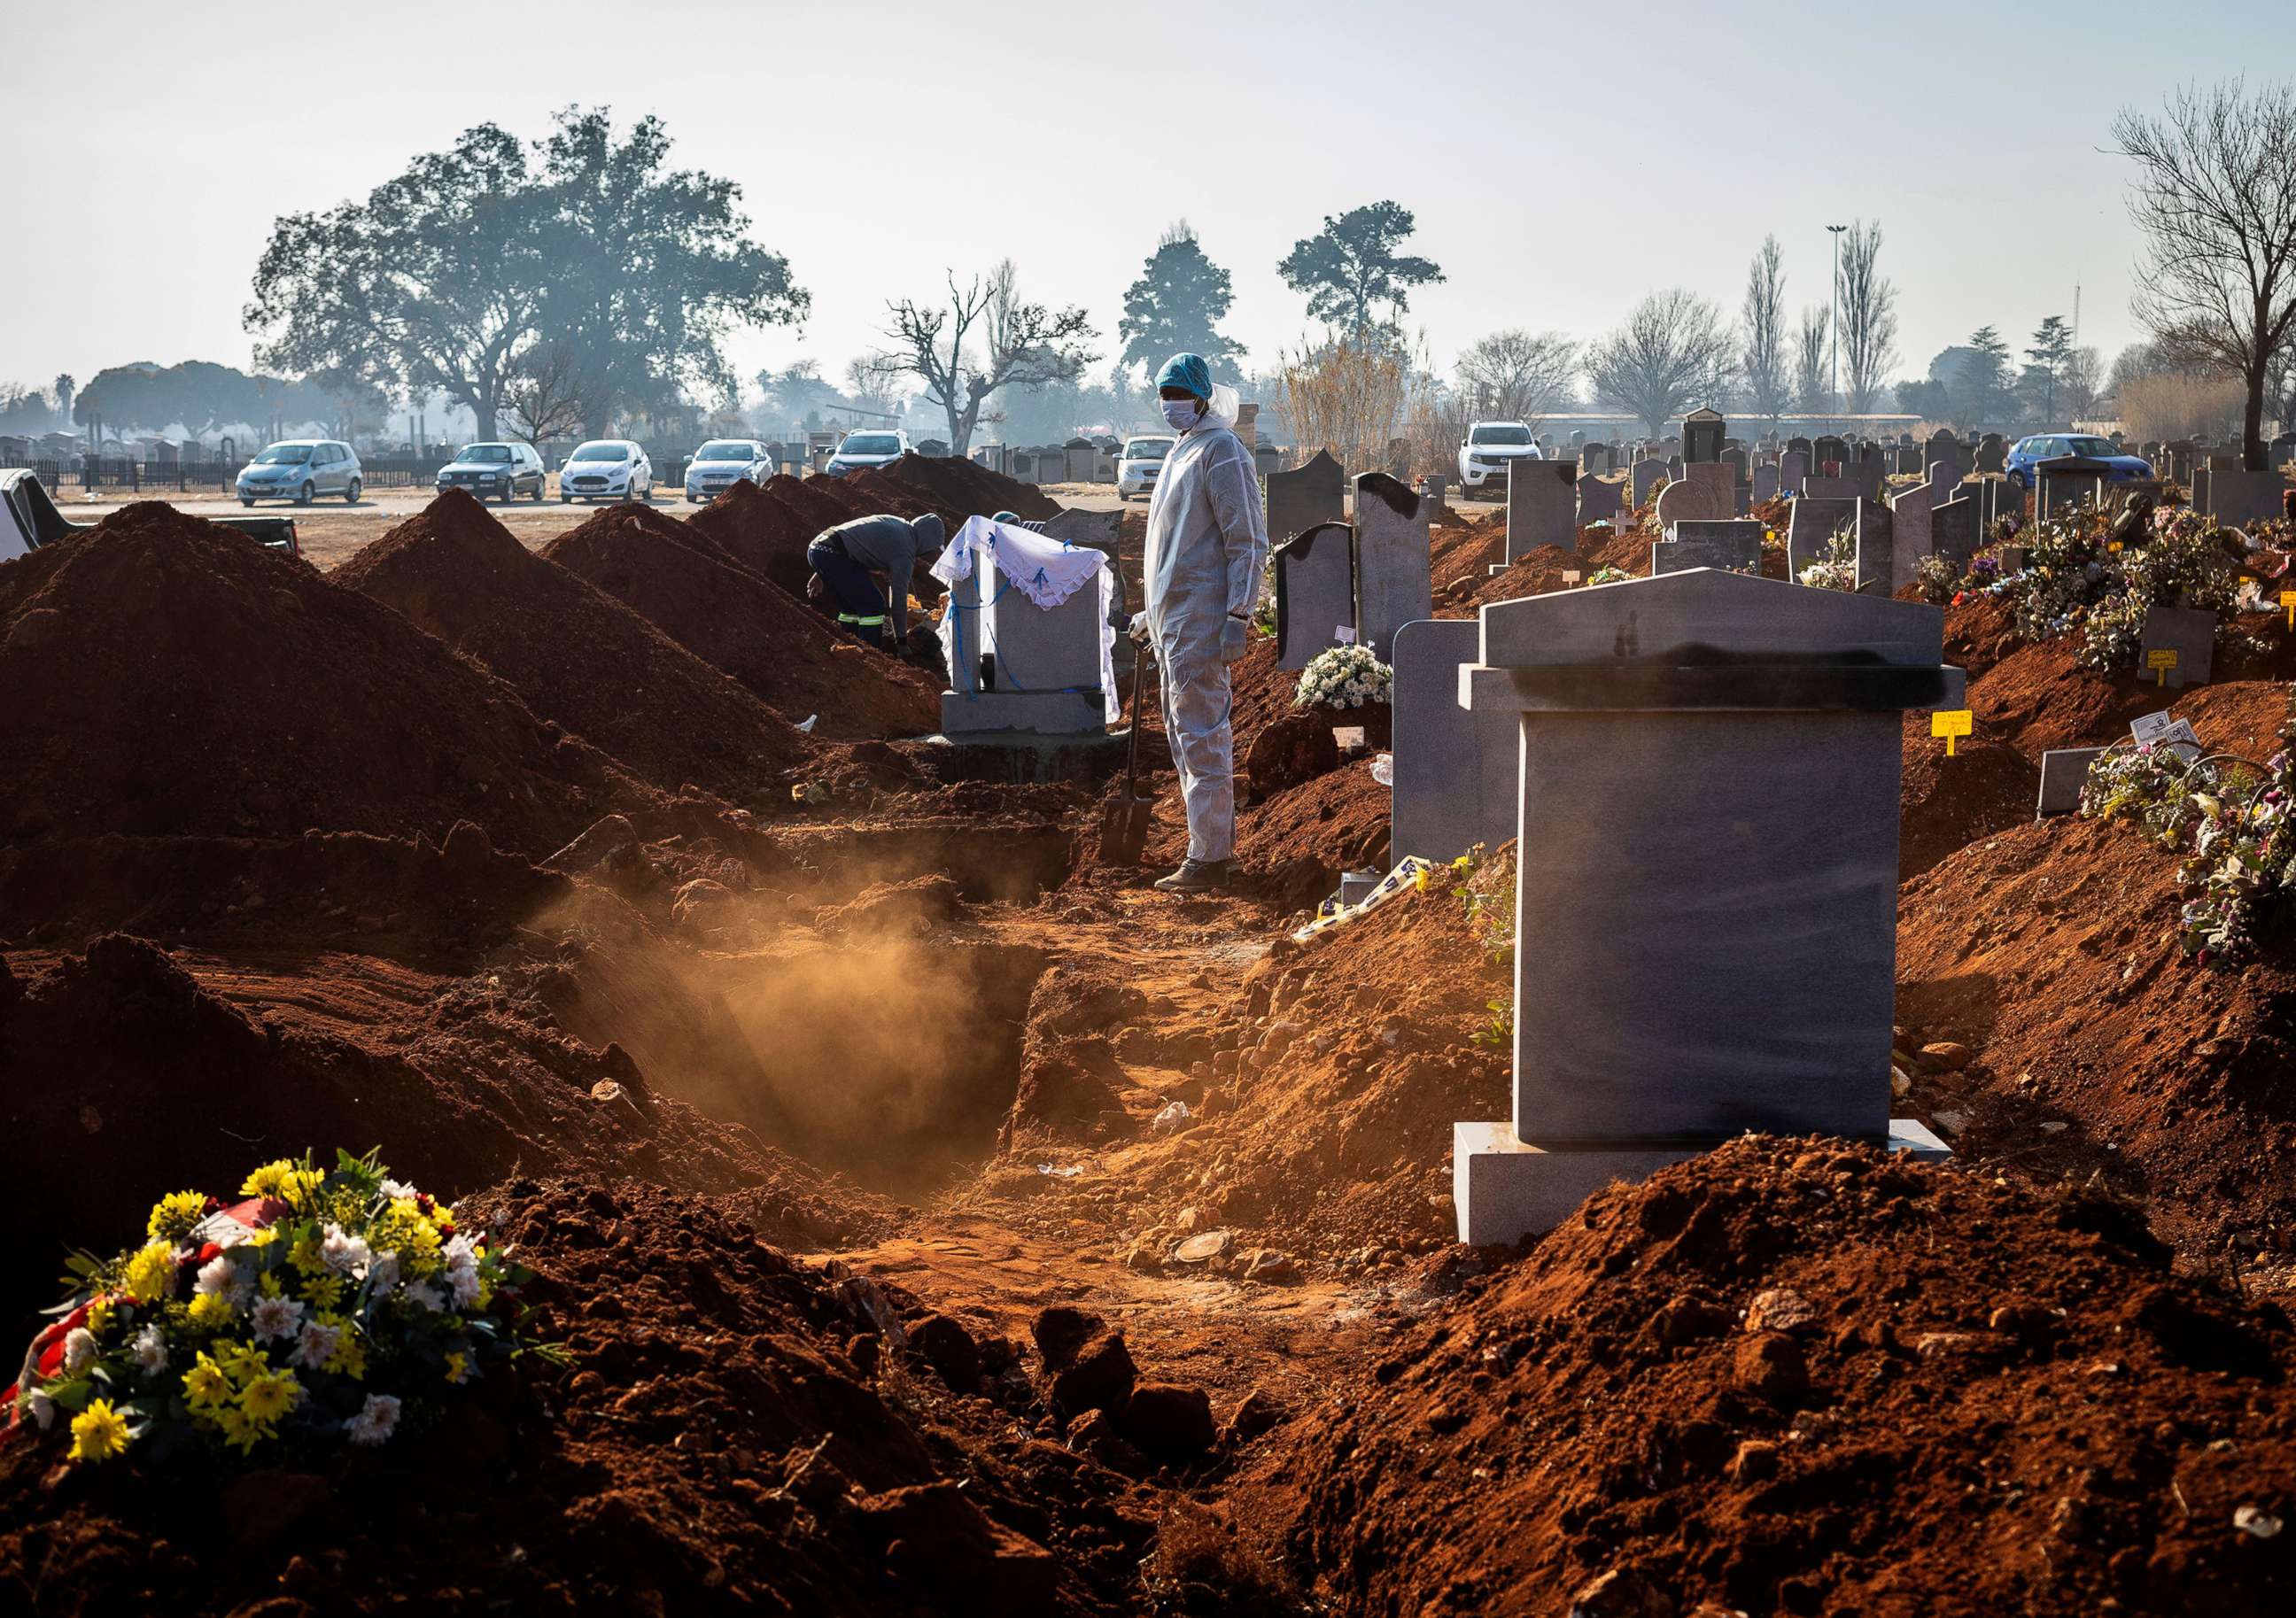 PHOTO: A family member wearing PPE looks on after the funeral of family member who died from Covid-19 at a graveyard on the 119 day of the pandemic lockdown in Johannesburg, July 24, 2020.